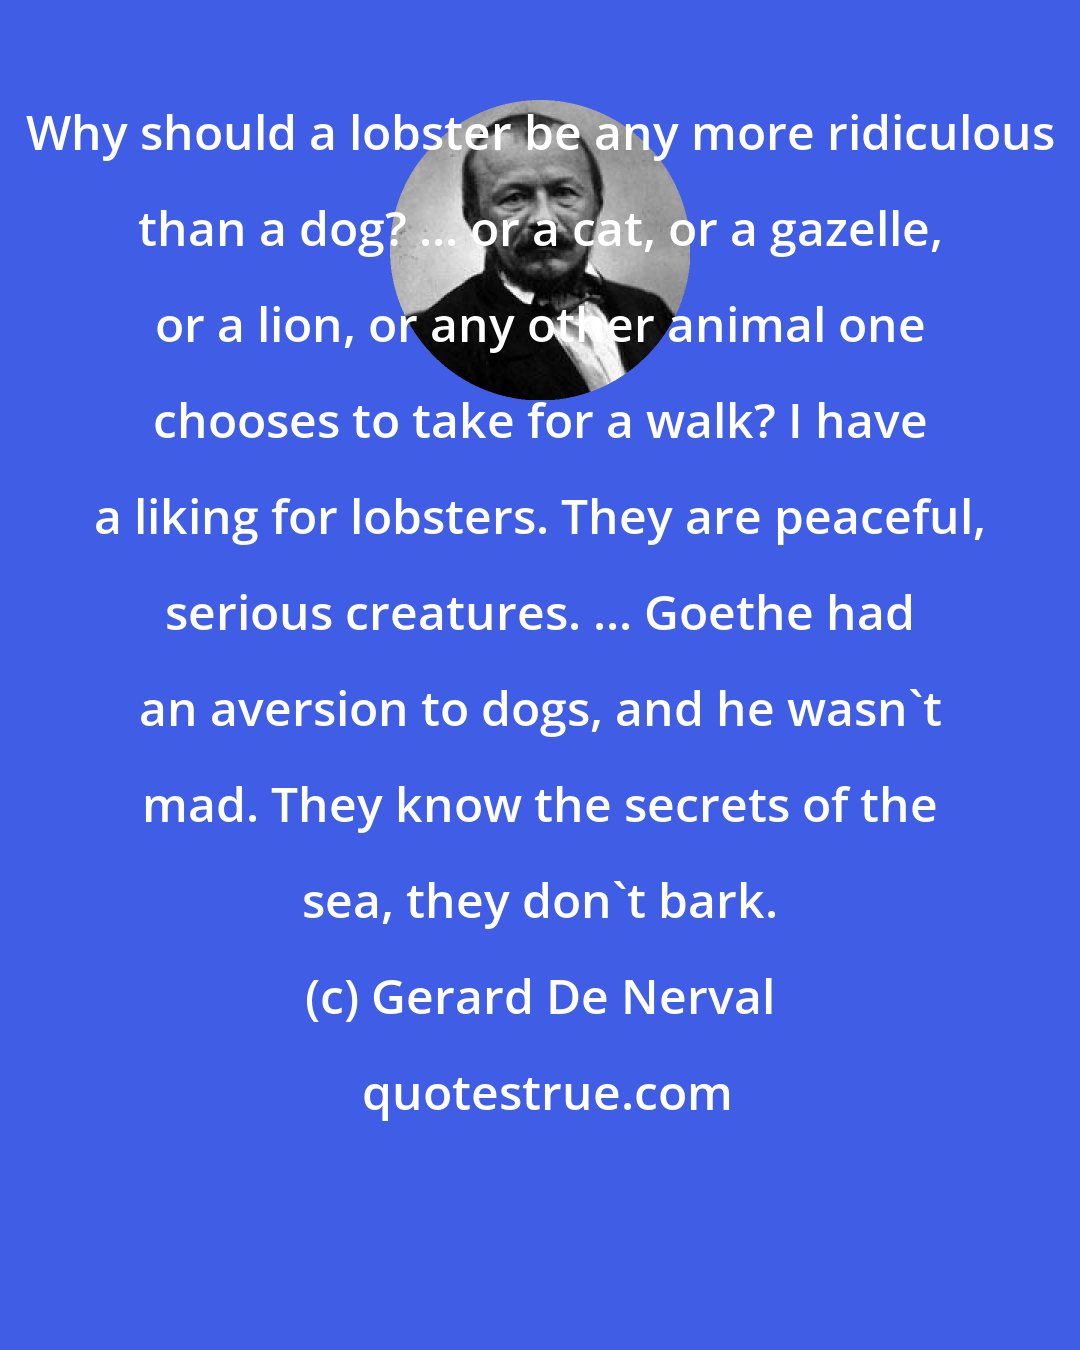 Gerard De Nerval: Why should a lobster be any more ridiculous than a dog? ... or a cat, or a gazelle, or a lion, or any other animal one chooses to take for a walk? I have a liking for lobsters. They are peaceful, serious creatures. ... Goethe had an aversion to dogs, and he wasn't mad. They know the secrets of the sea, they don't bark.